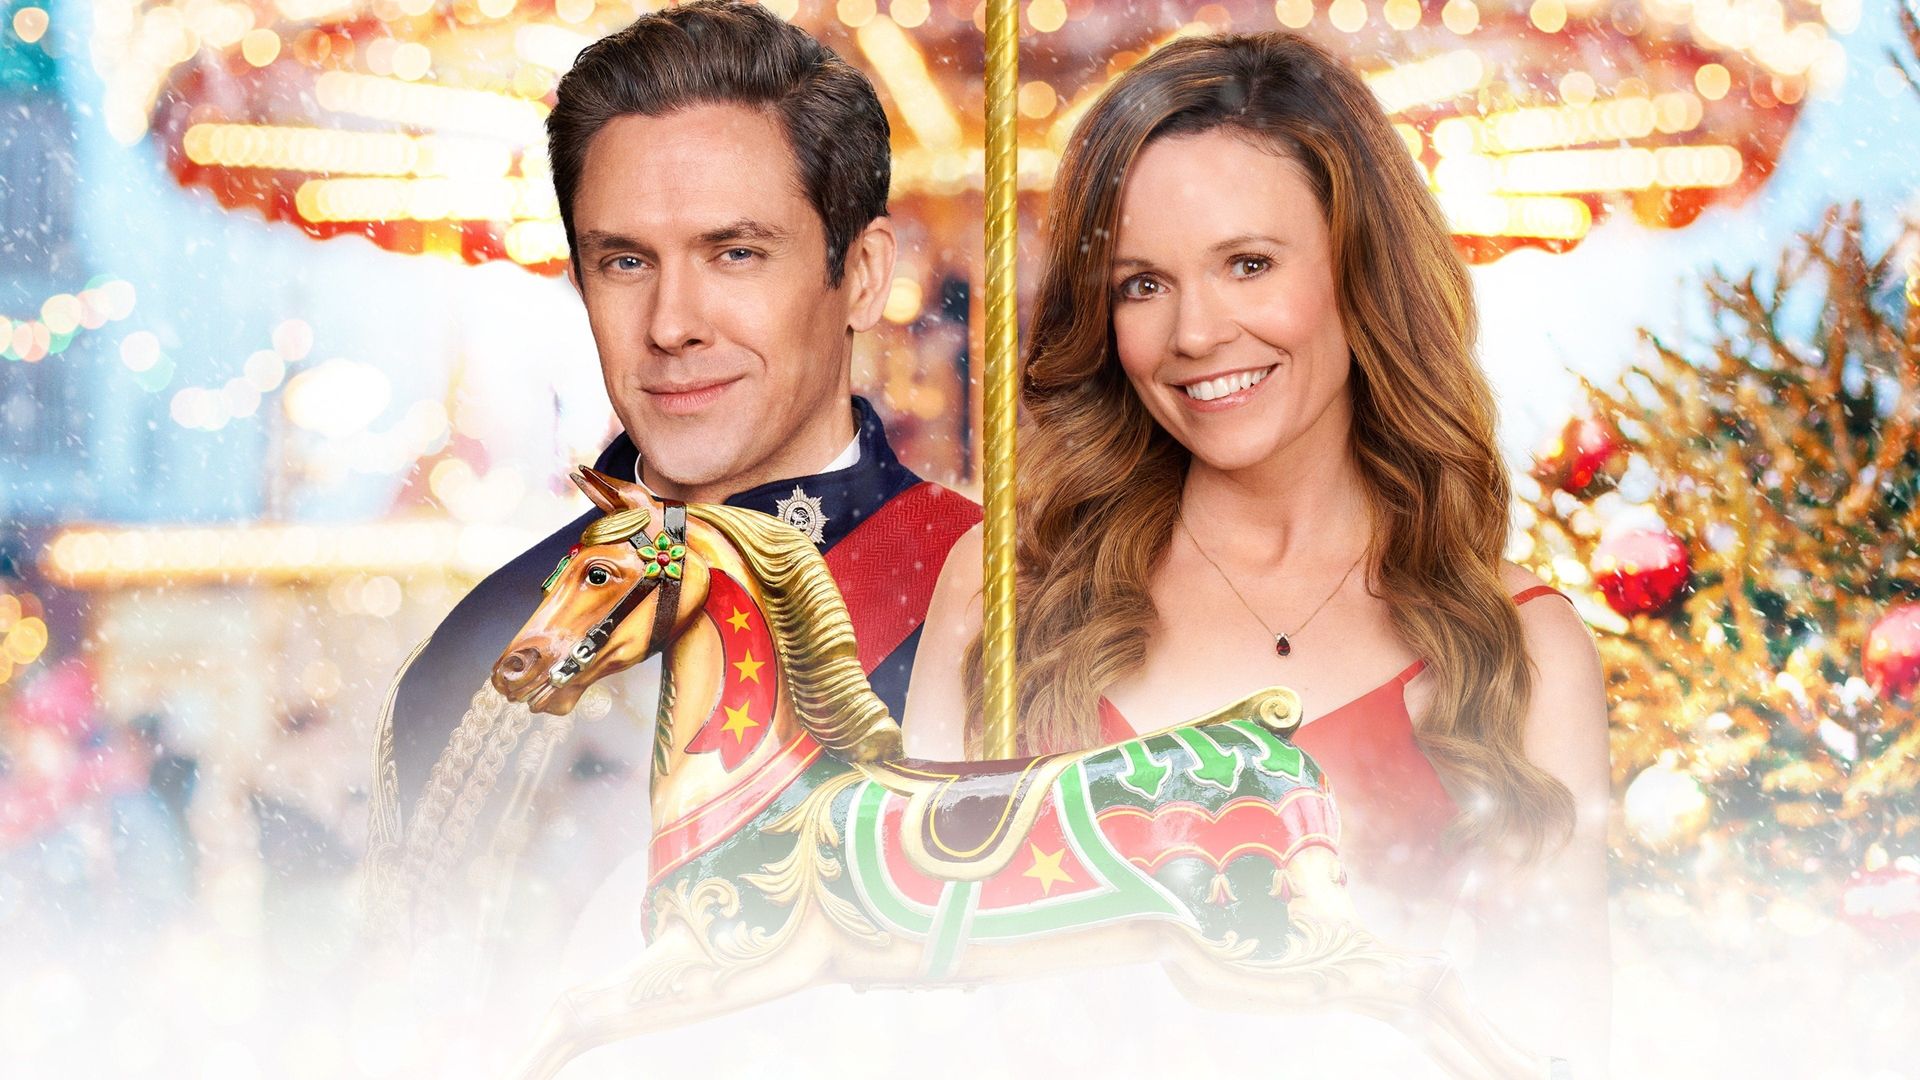 A Christmas Carousel background